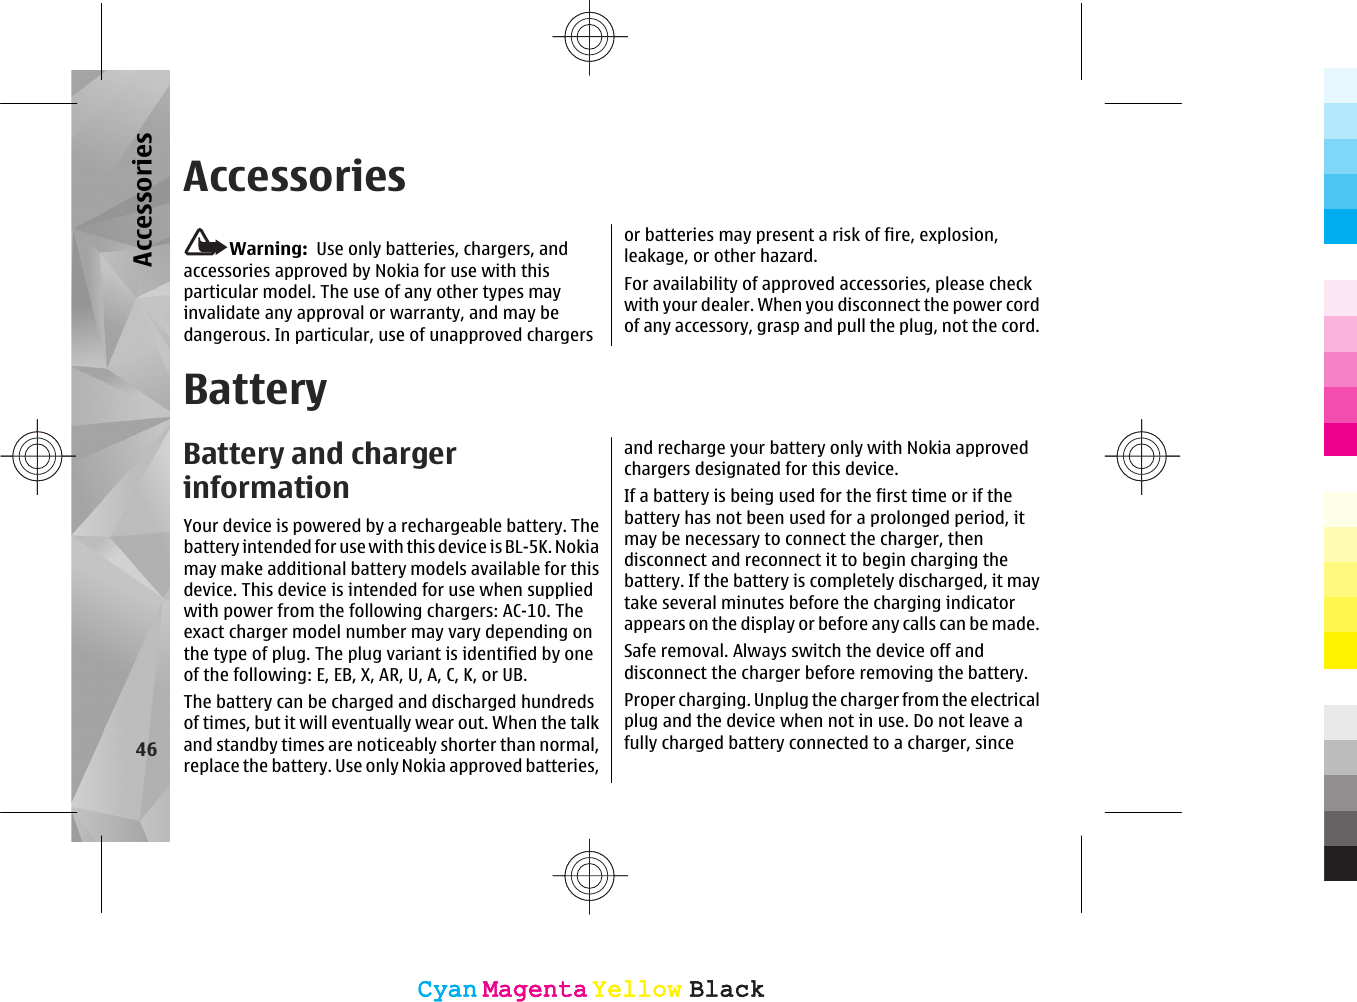 AccessoriesWarning:  Use only batteries, chargers, andaccessories approved by Nokia for use with thisparticular model. The use of any other types mayinvalidate any approval or warranty, and may bedangerous. In particular, use of unapproved chargersor batteries may present a risk of fire, explosion,leakage, or other hazard.For availability of approved accessories, please checkwith your dealer. When you disconnect the power cordof any accessory, grasp and pull the plug, not the cord.BatteryBattery and chargerinformationYour device is powered by a rechargeable battery. Thebattery intended for use with this device is BL-5K. Nokiamay make additional battery models available for thisdevice. This device is intended for use when suppliedwith power from the following chargers: AC-10. Theexact charger model number may vary depending onthe type of plug. The plug variant is identified by oneof the following: E, EB, X, AR, U, A, C, K, or UB.The battery can be charged and discharged hundredsof times, but it will eventually wear out. When the talkand standby times are noticeably shorter than normal,replace the battery. Use only Nokia approved batteries,and recharge your battery only with Nokia approvedchargers designated for this device.If a battery is being used for the first time or if thebattery has not been used for a prolonged period, itmay be necessary to connect the charger, thendisconnect and reconnect it to begin charging thebattery. If the battery is completely discharged, it maytake several minutes before the charging indicatorappears on the display or before any calls can be made.Safe removal. Always switch the device off anddisconnect the charger before removing the battery.Proper charging. Unplug the charger from the electricalplug and the device when not in use. Do not leave afully charged battery connected to a charger, since46AccessoriesCyanCyanMagentaMagentaYellowYellowBlackBlackCyanCyanMagentaMagentaYellowYellowBlackBlack